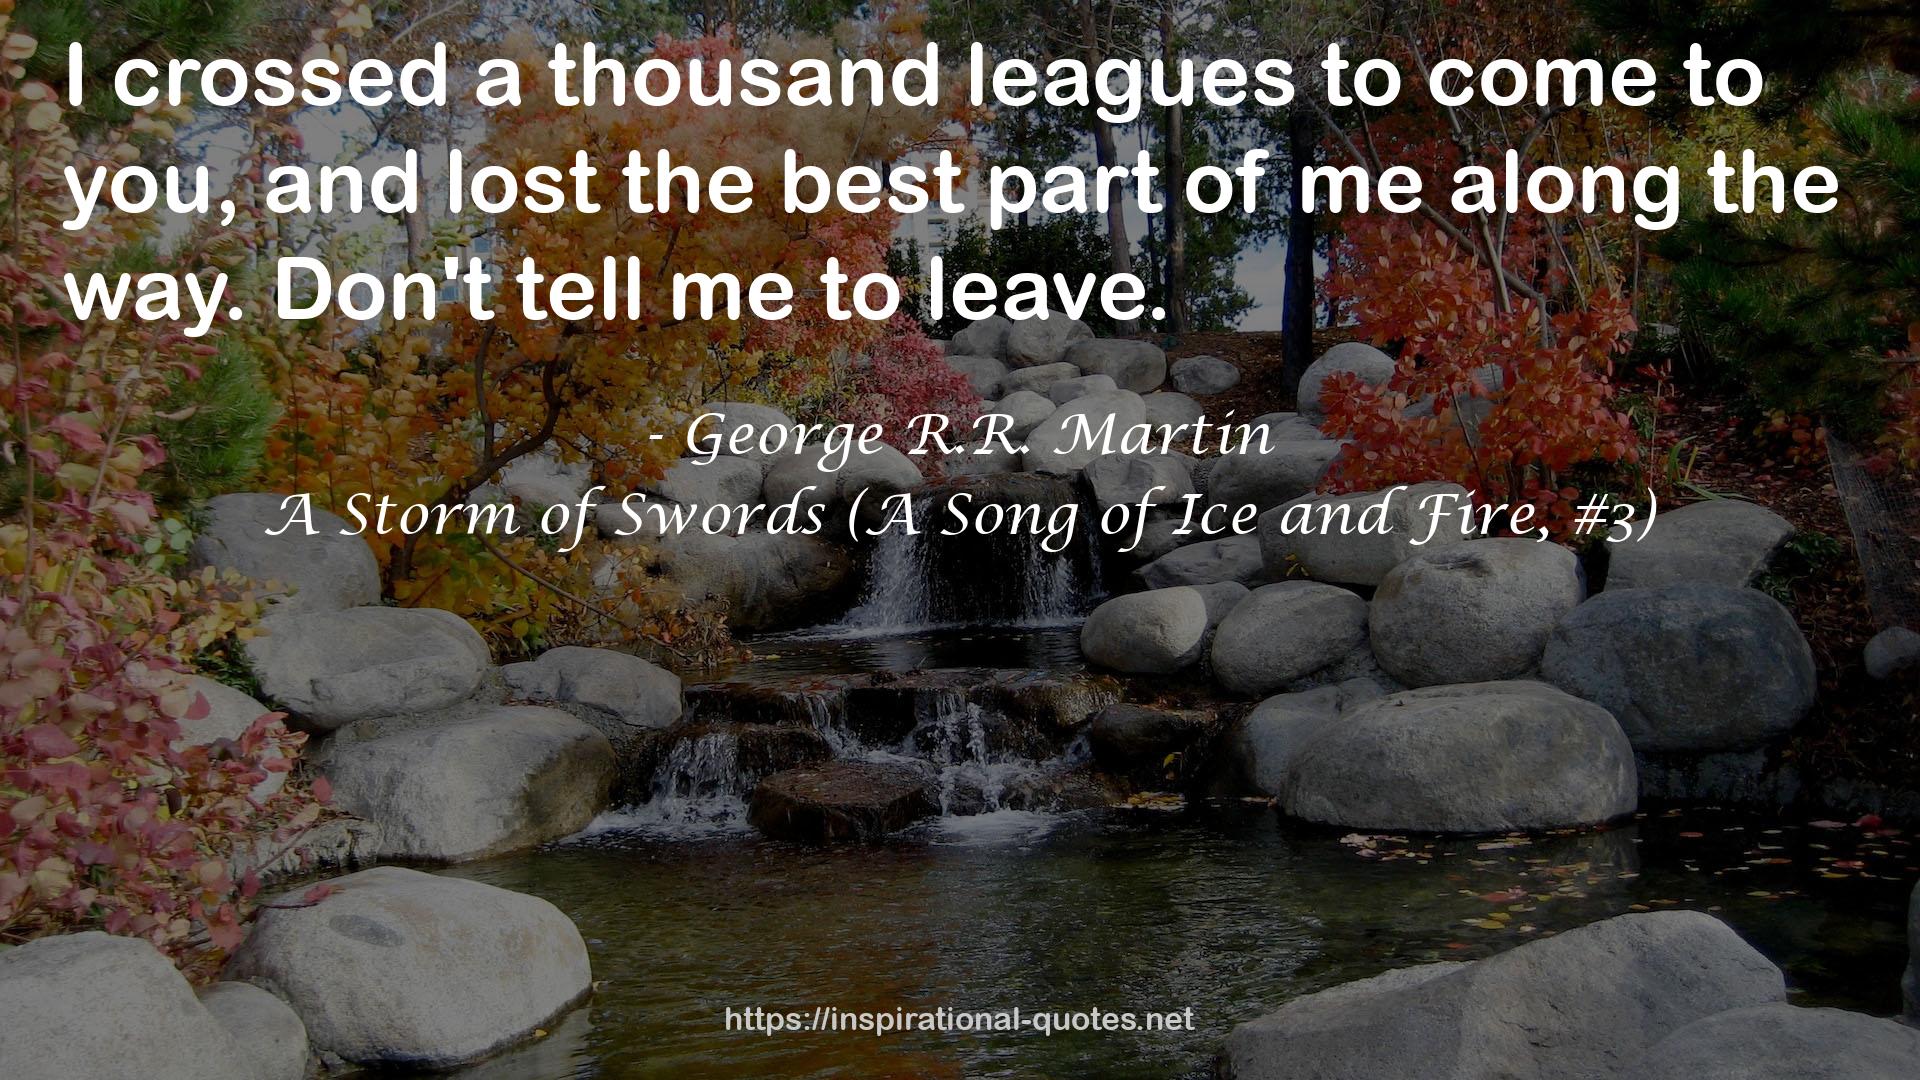 A Storm of Swords (A Song of Ice and Fire, #3) QUOTES